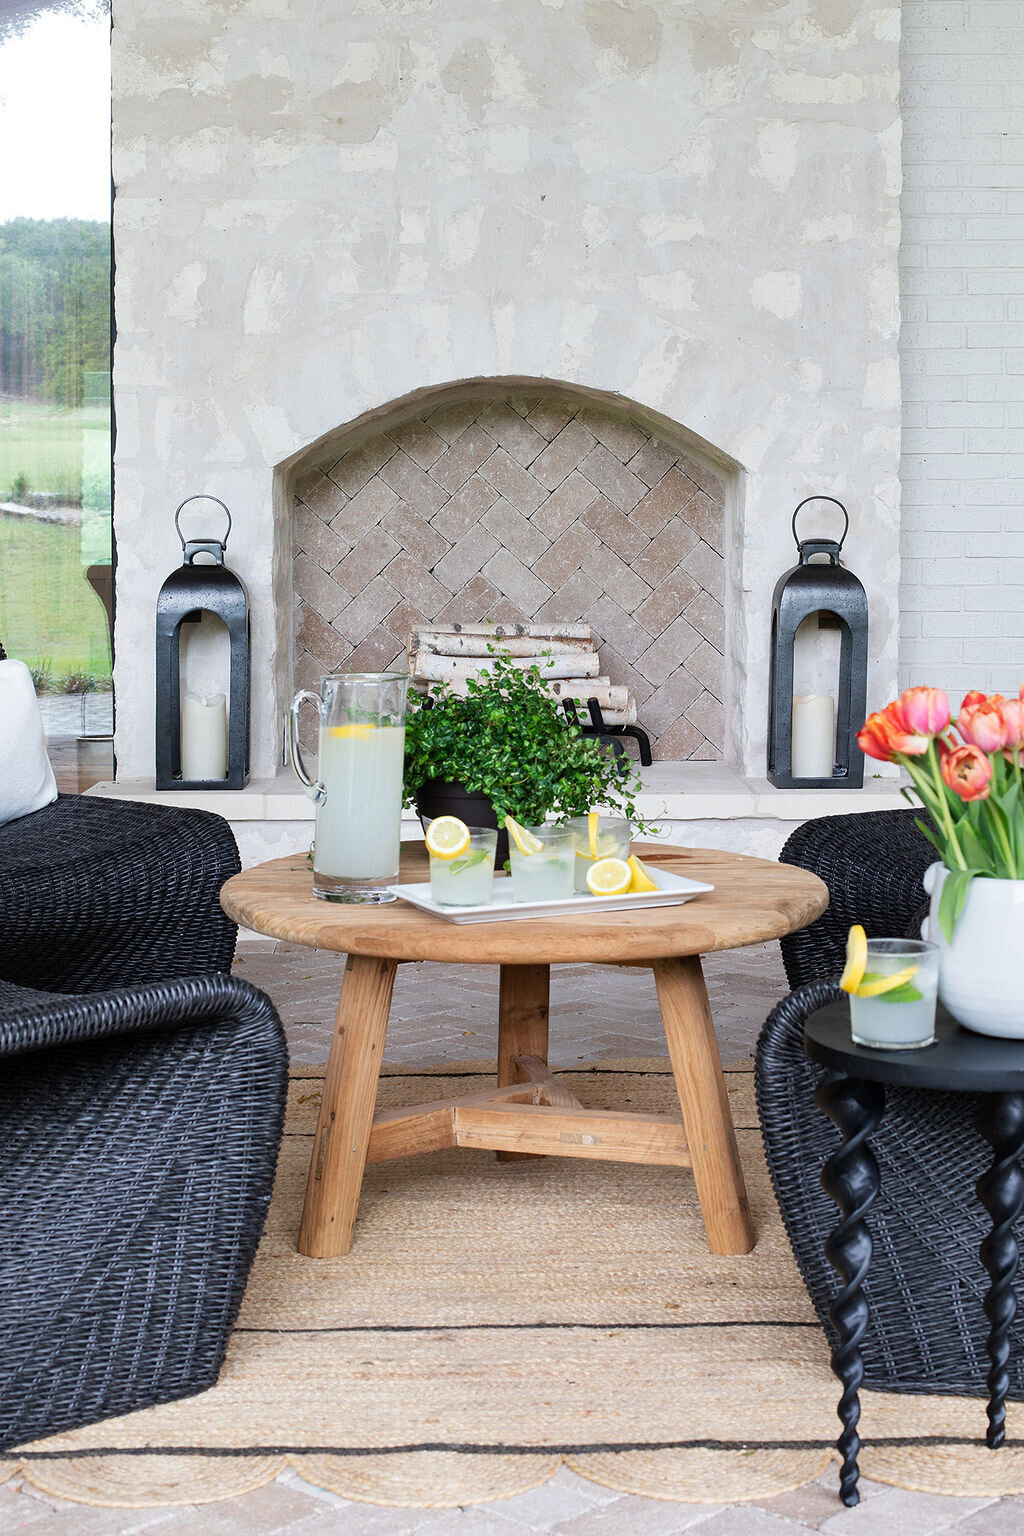 stone fireplace outside with seating